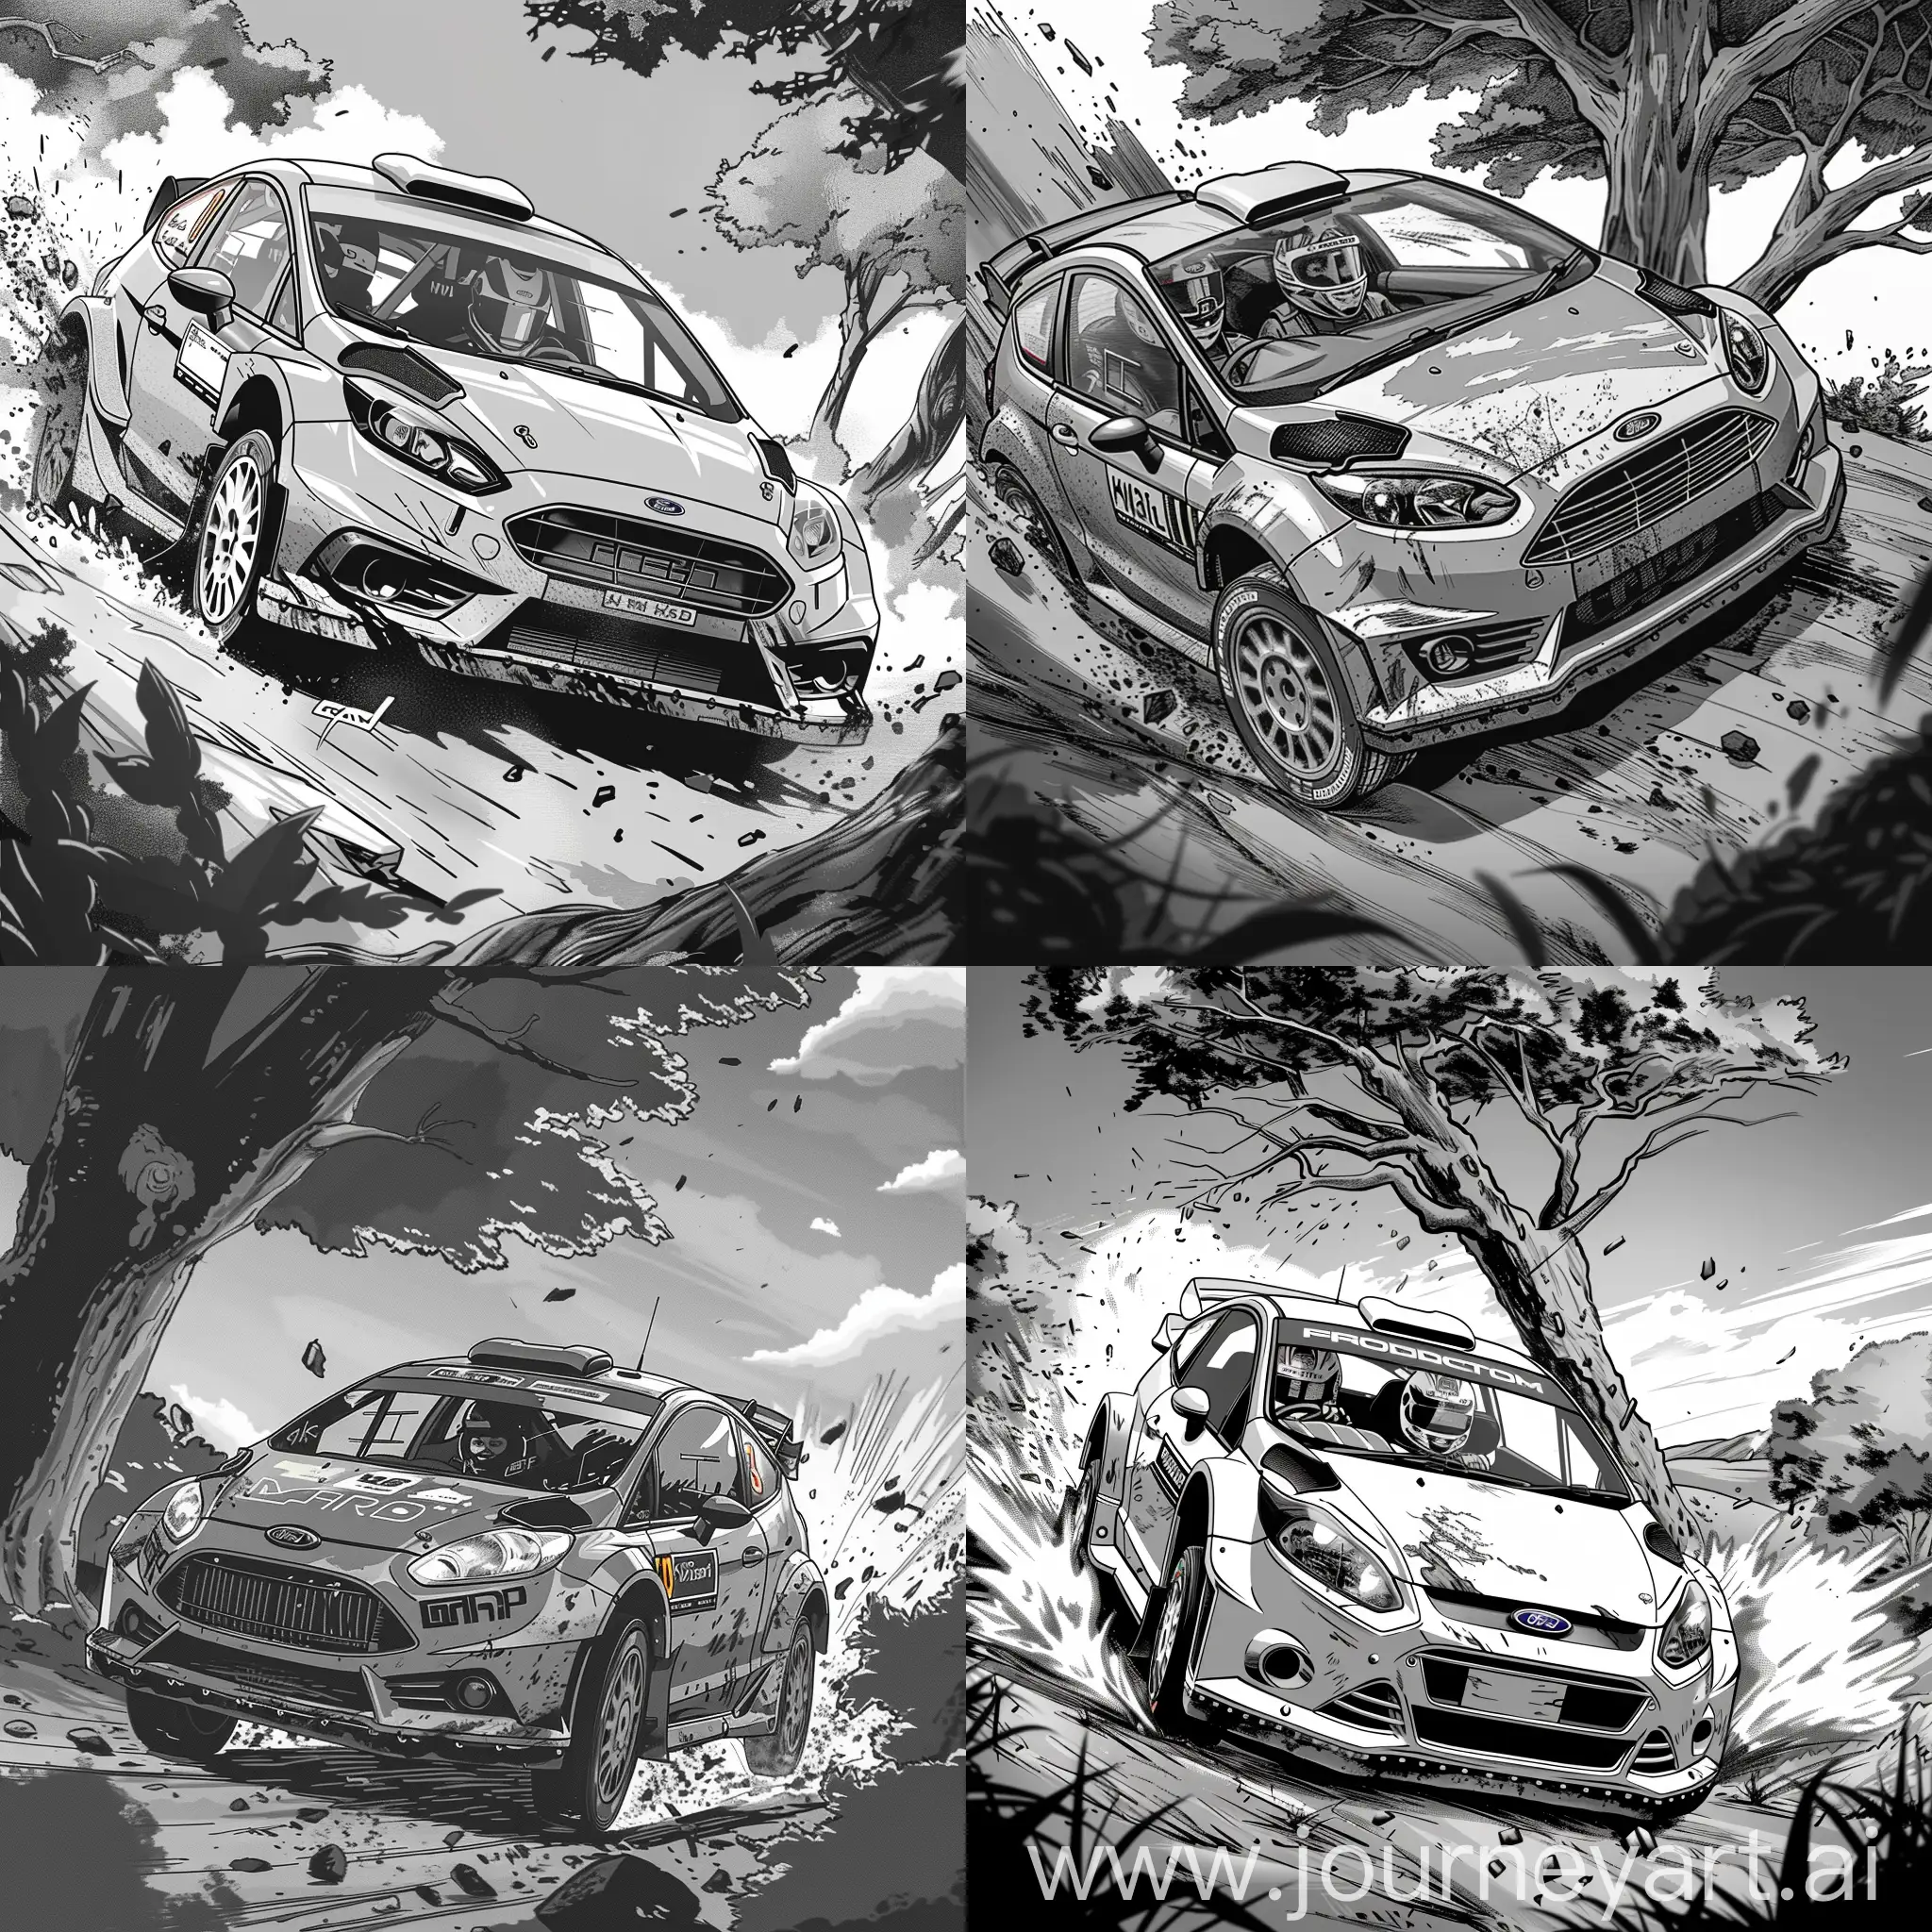 a grayscale manga panel about a rally driver driving a ford fiesta wrc wearing a full face helmet with his co driver that crashes into a tree in a rally stage on Wales